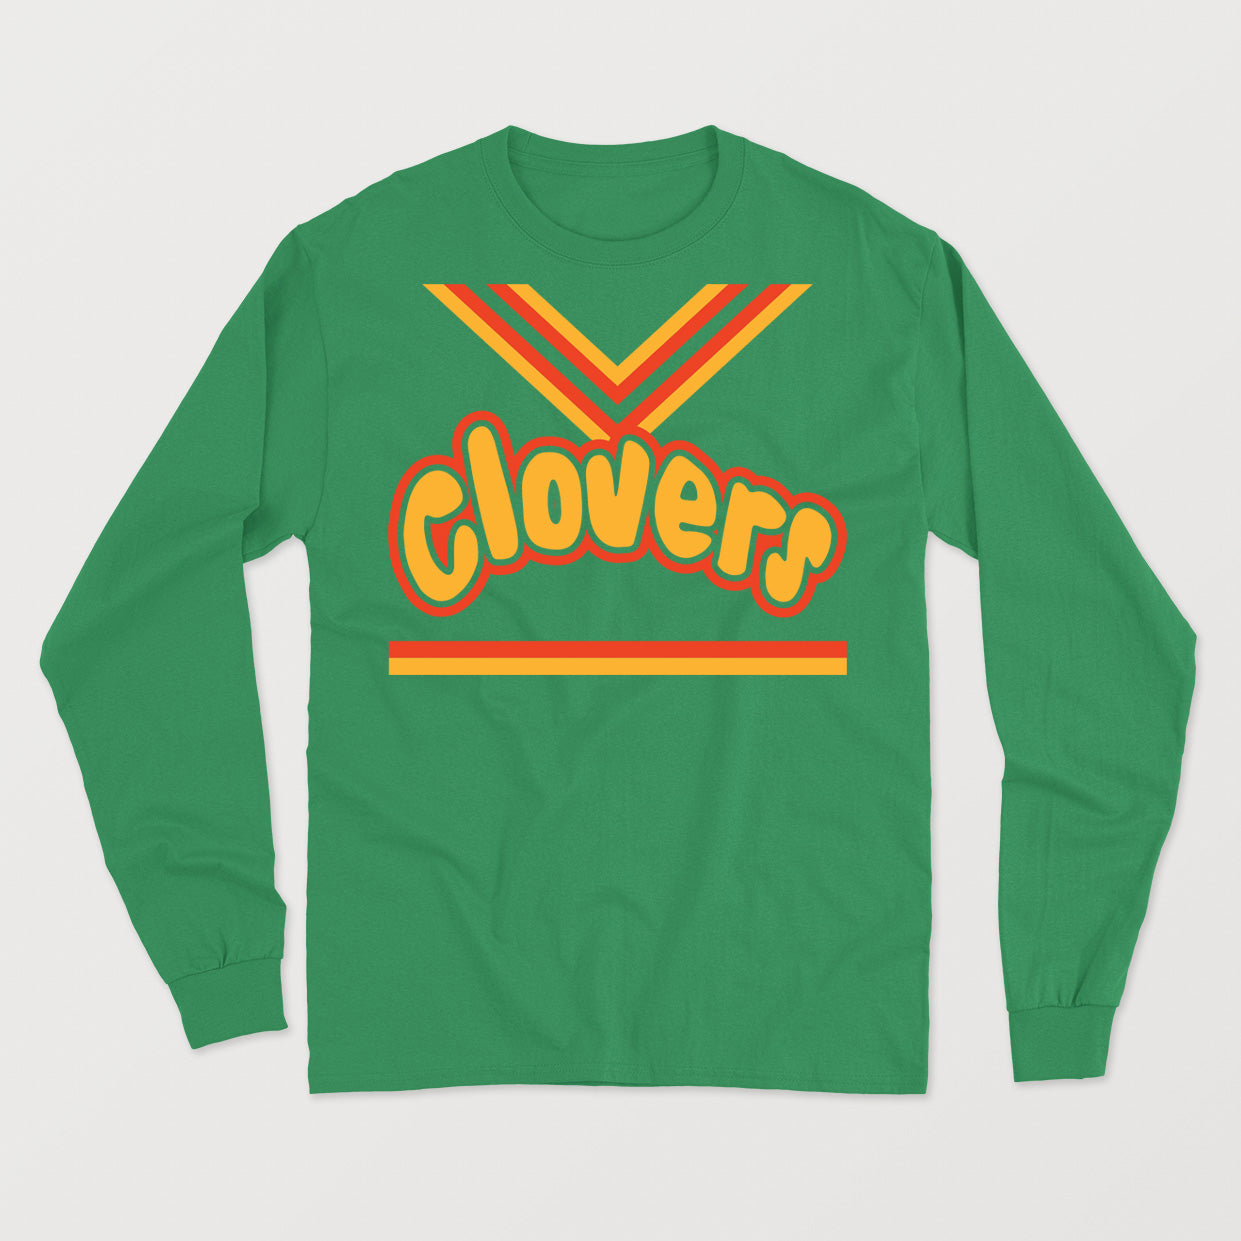 BRING IT ON (Toros and Clovers) longsleeve unisexe - tamelo boutique